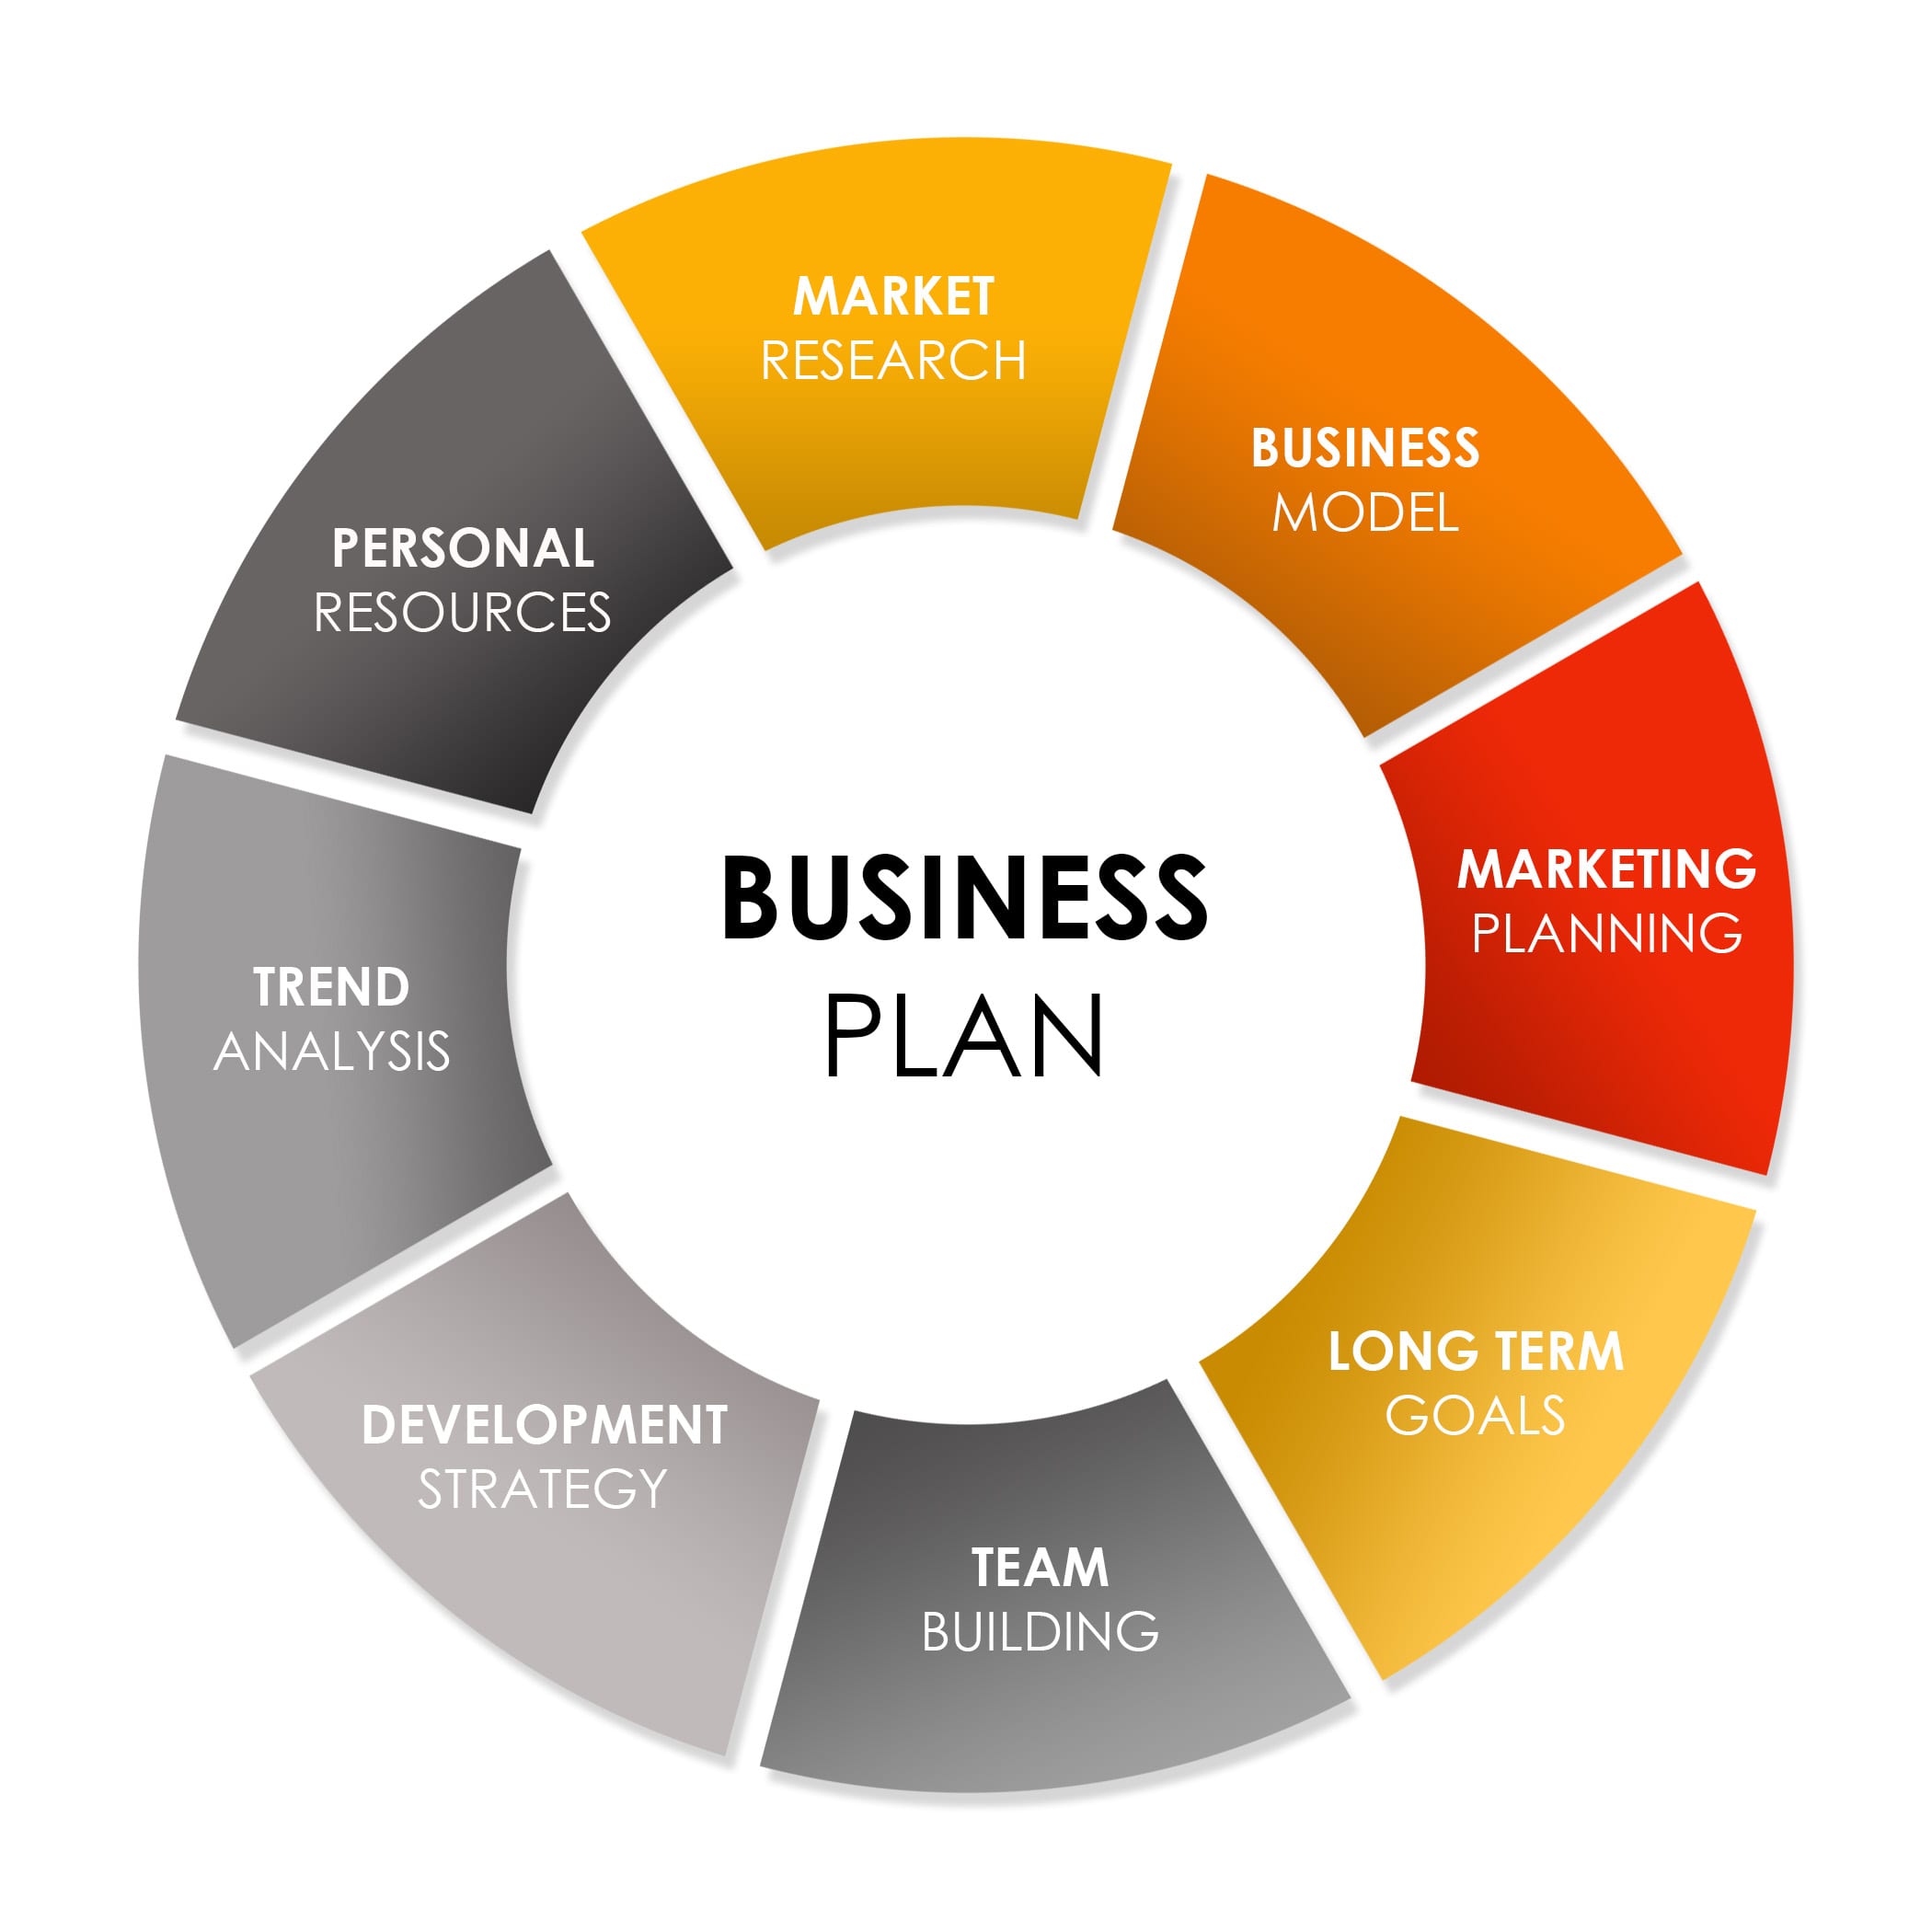 the business plan of a for profit company typically focuses on